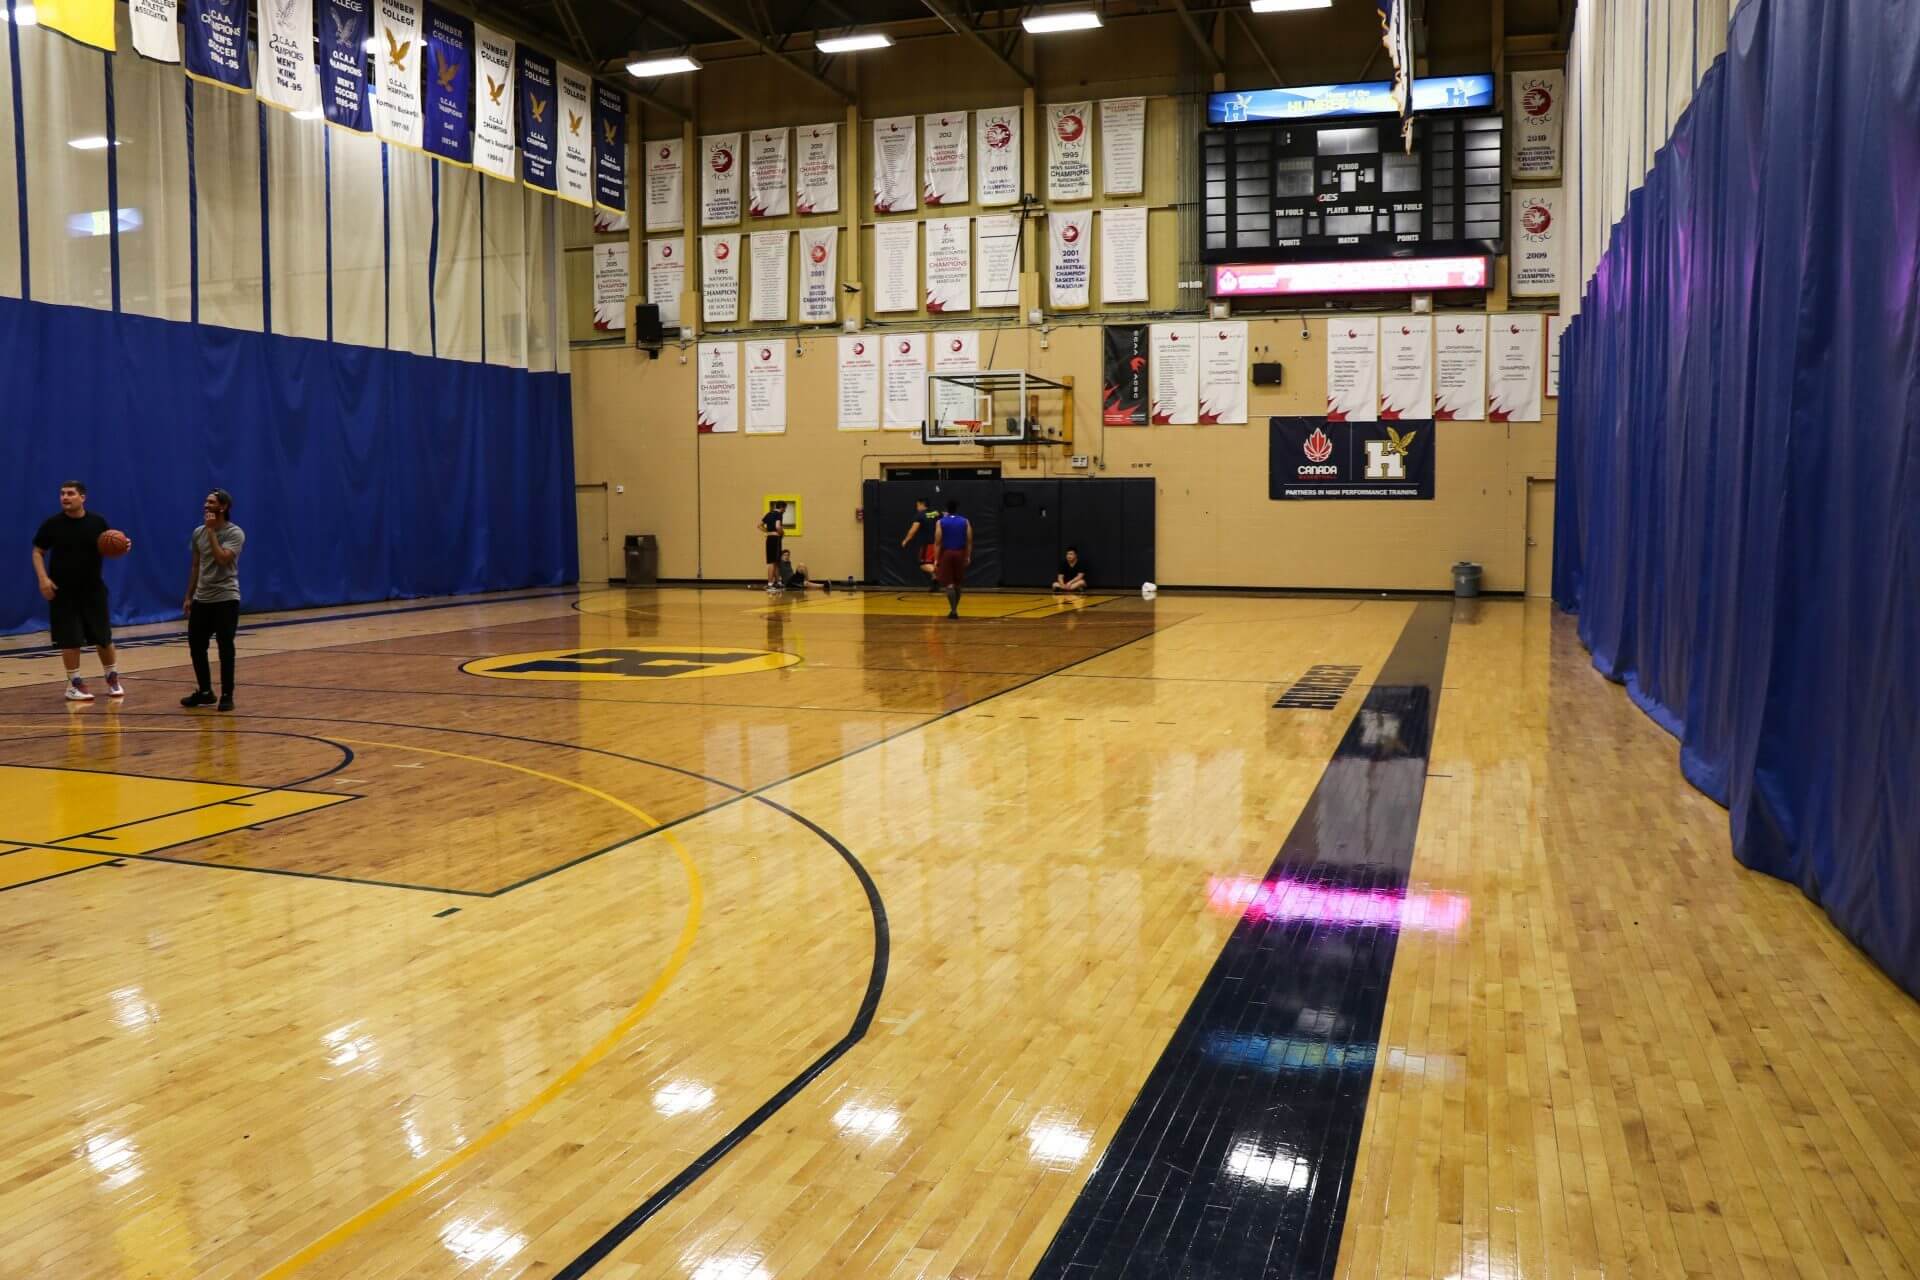 Humber College North's gym